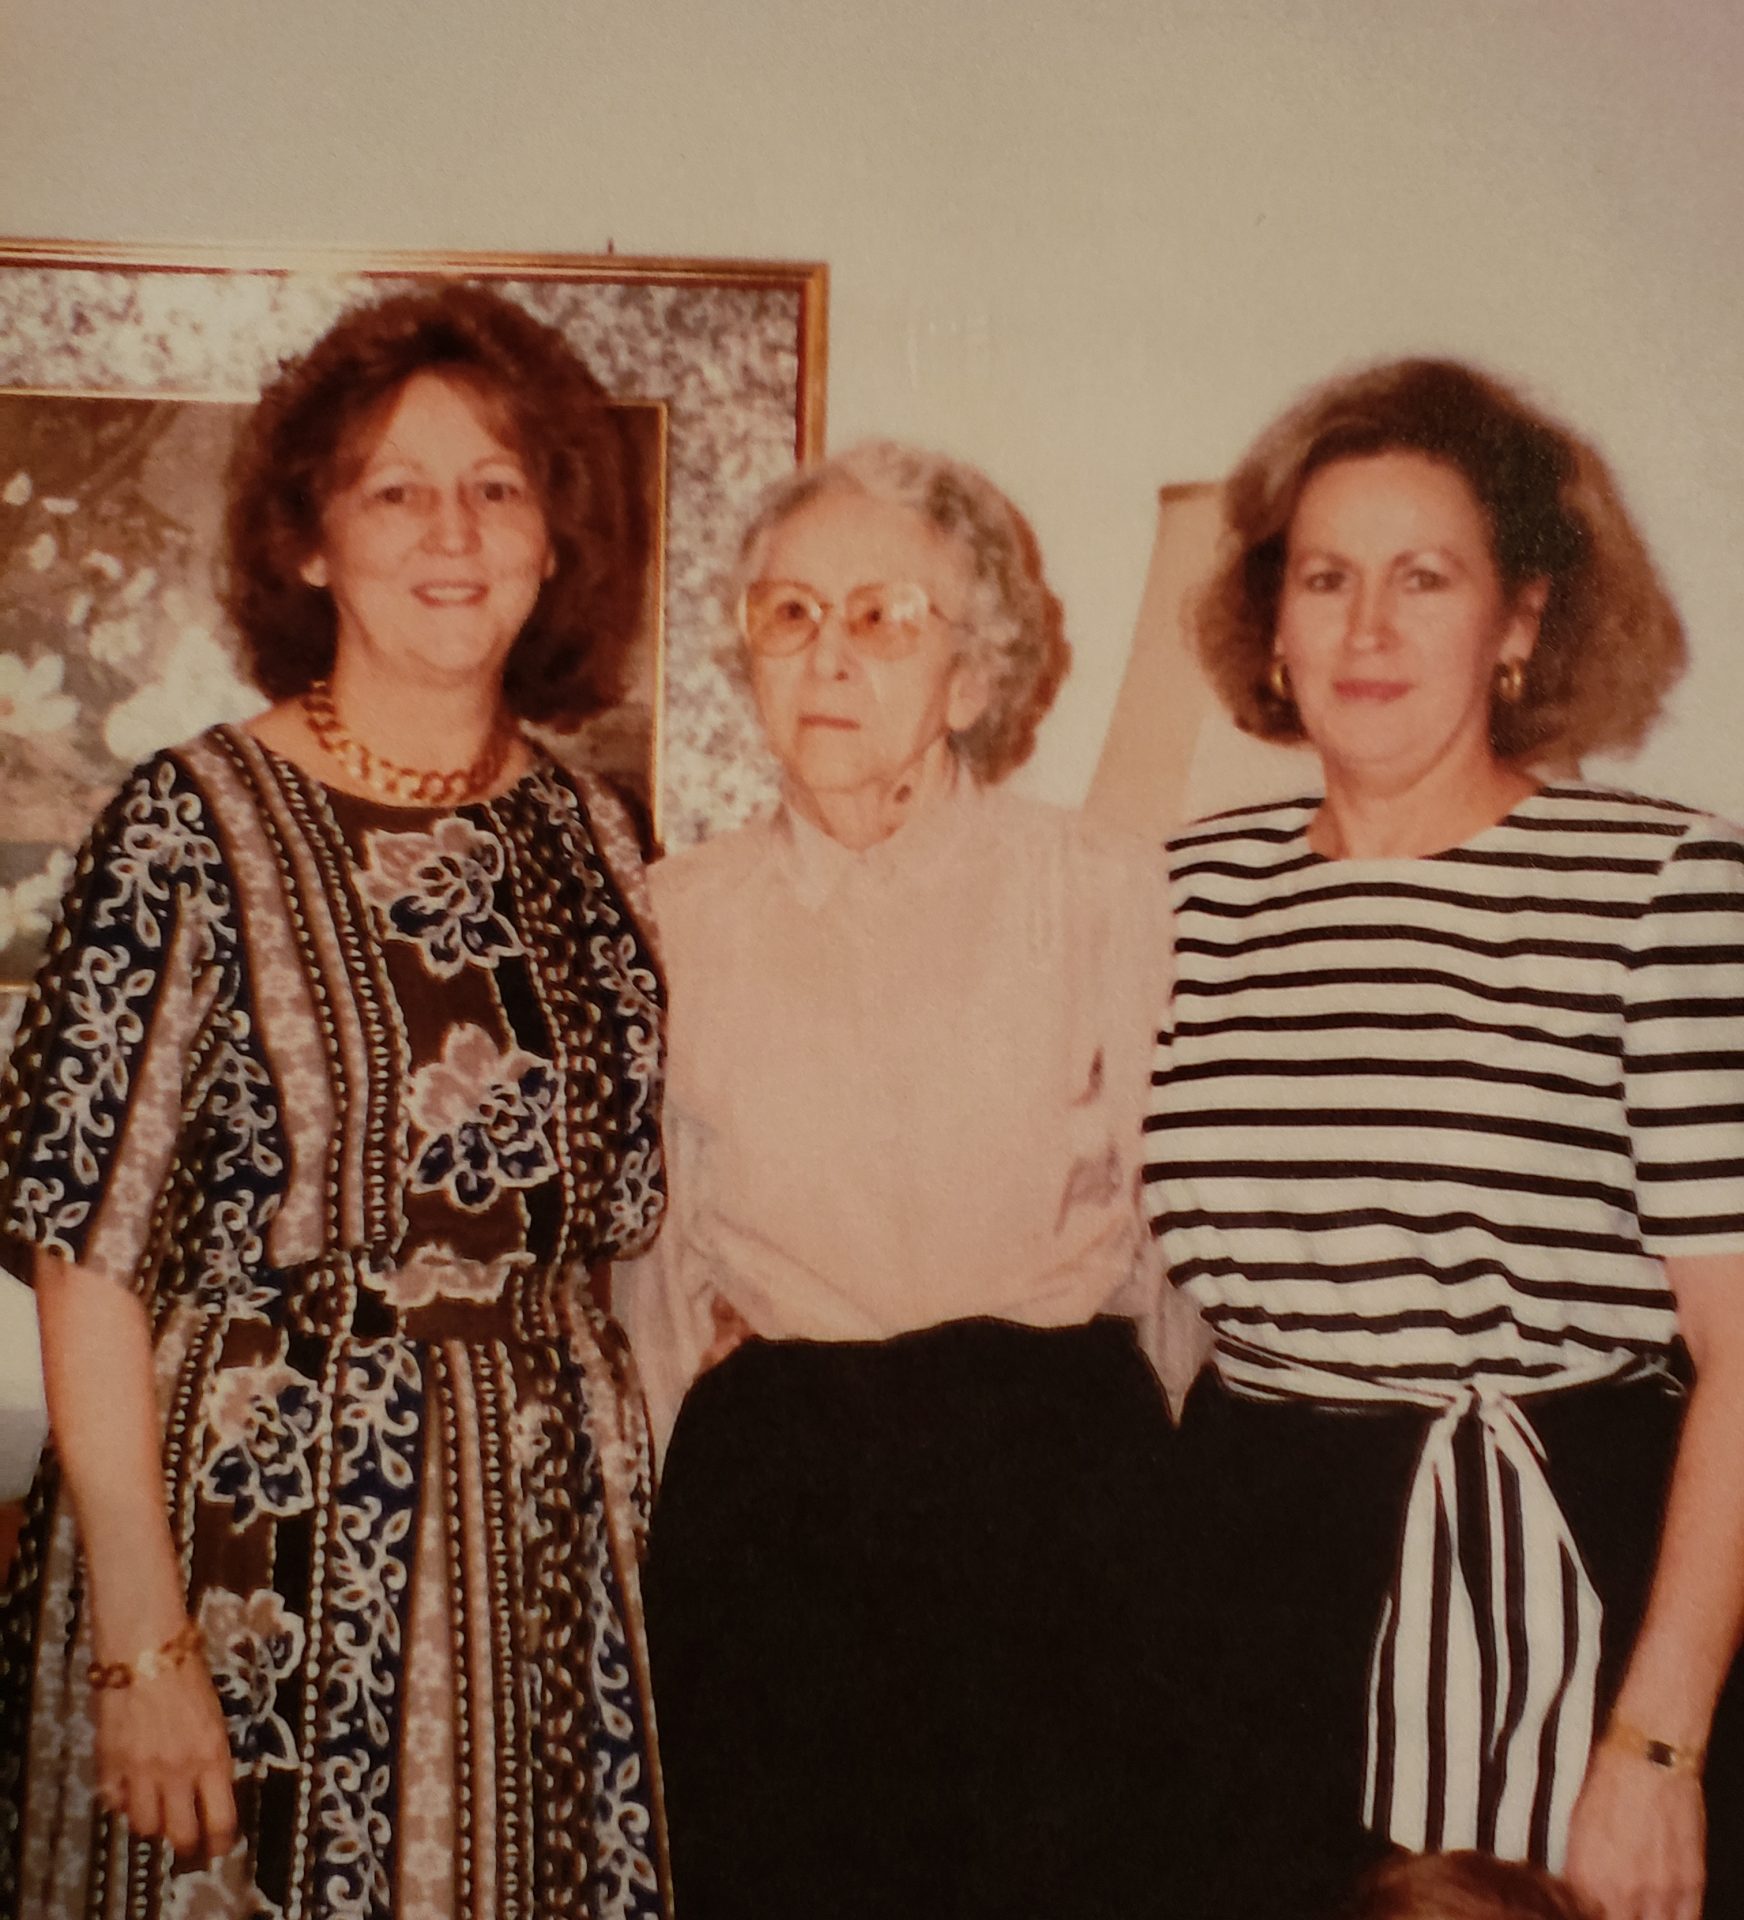 Ruth, Vivian and their mother